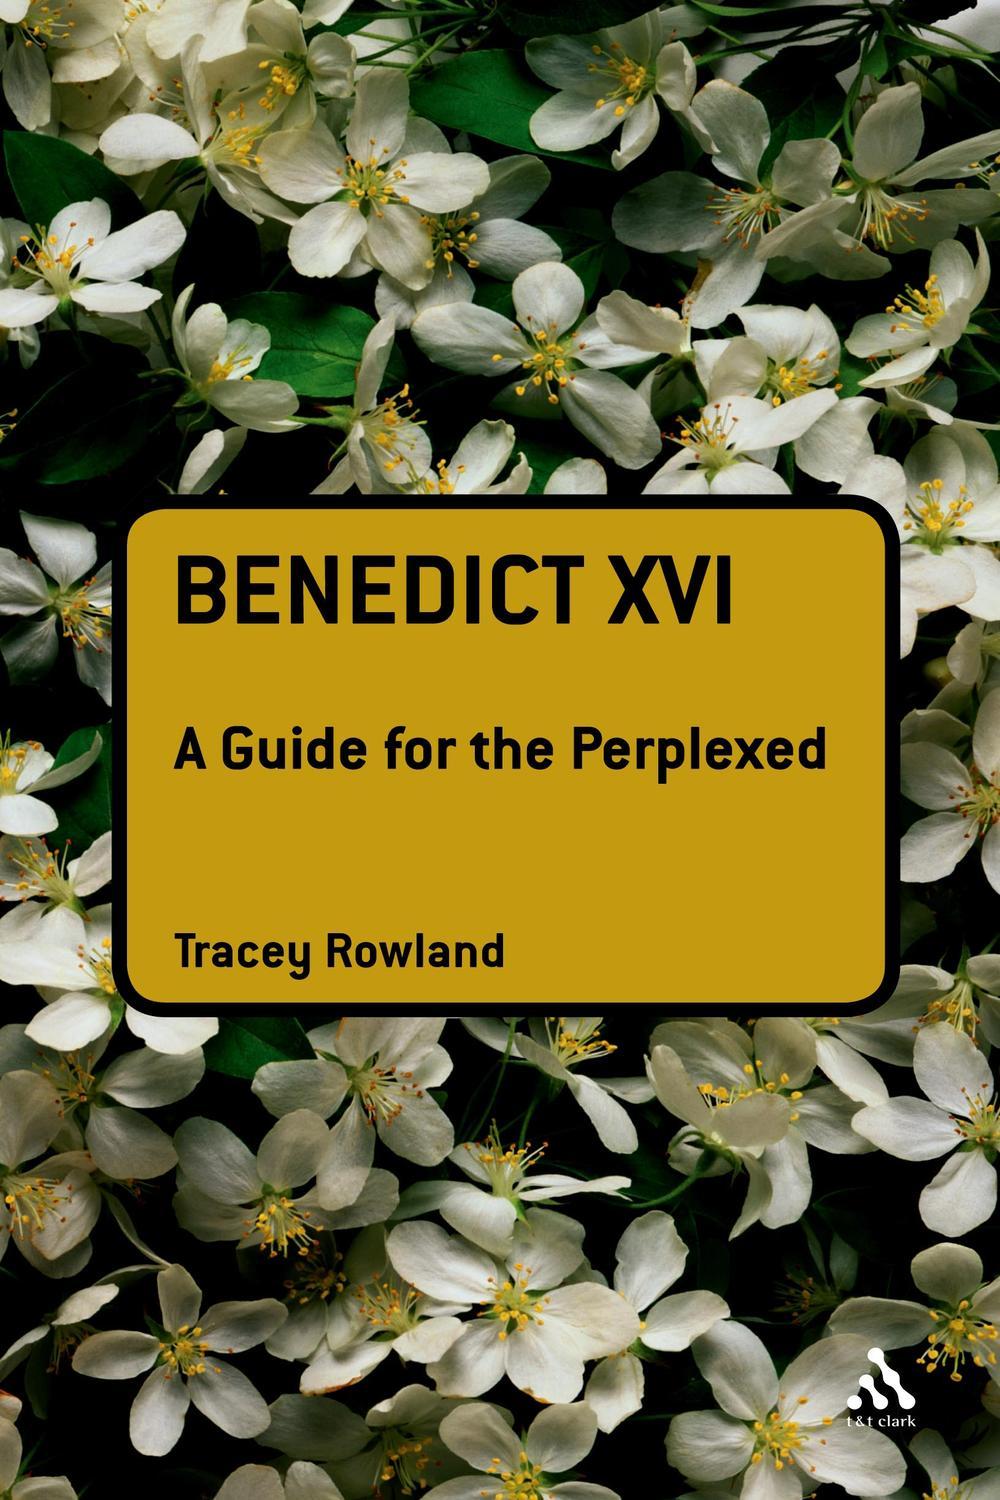 Benedict XVI: A Guide for the Perplexed - Tracey Rowland